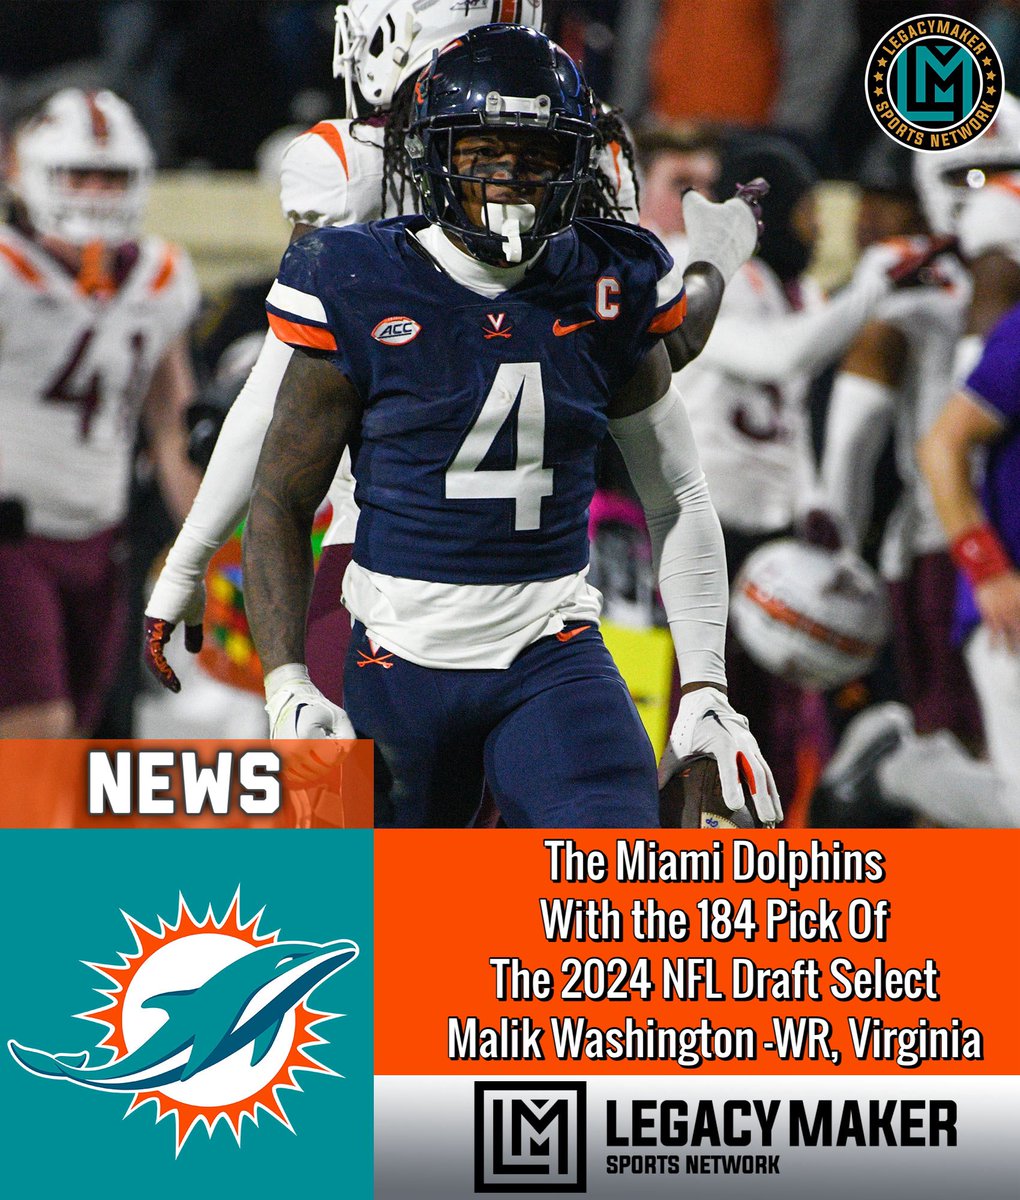 The Miami #Dolphins
With the 184 Pick Of
The 2024 NFL Draft Select
Malik Washington -WR, Virginia

#GoHoos #NFLDraft #LMSNetwork